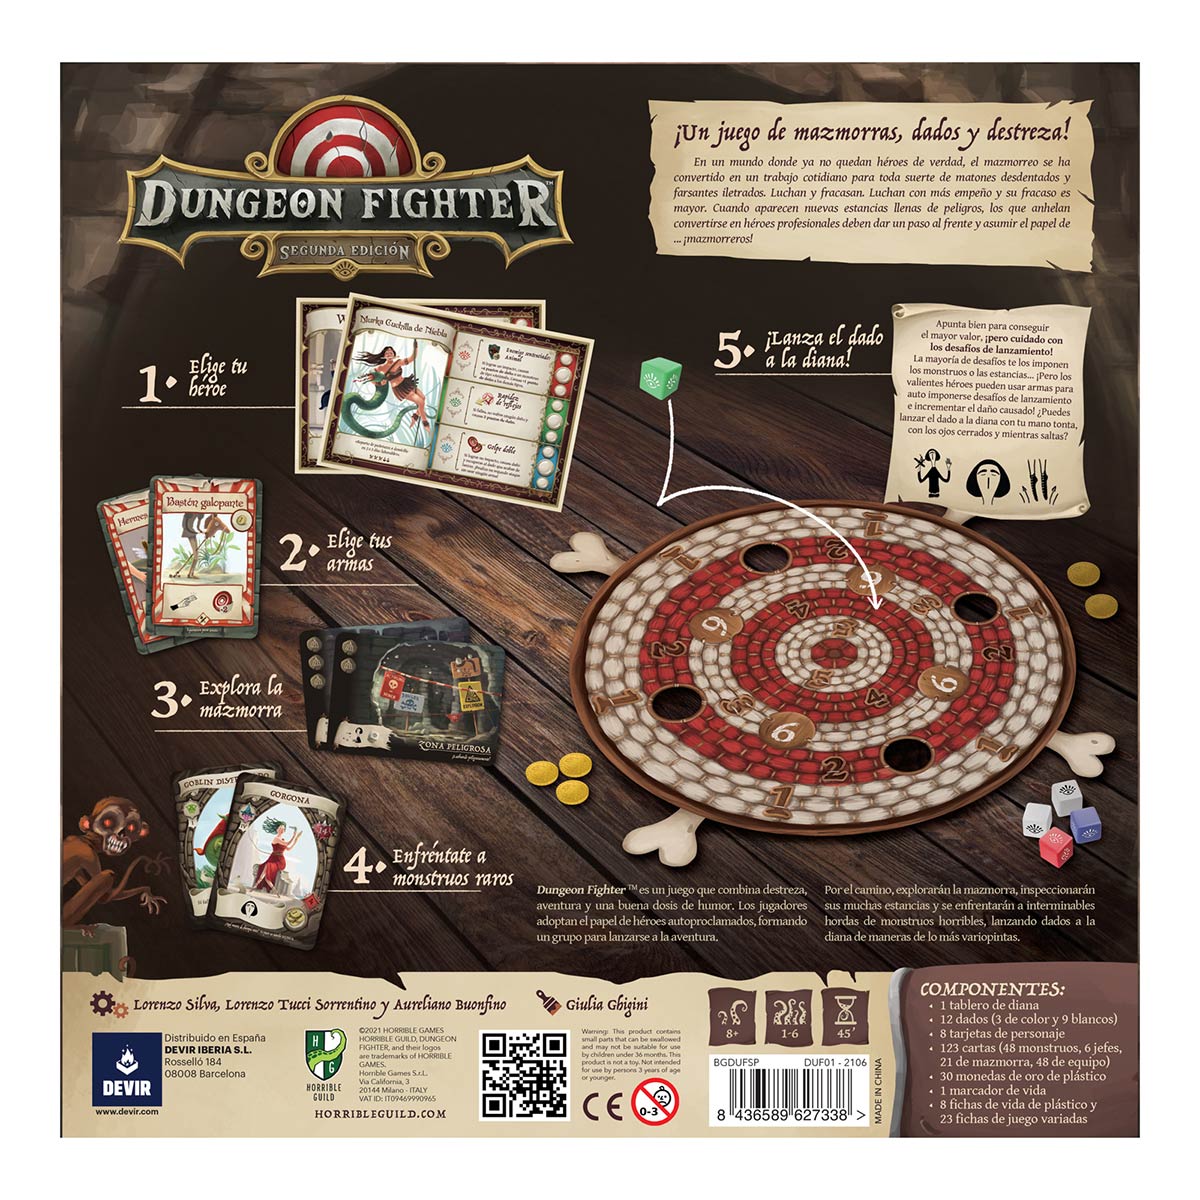 Dungeon Fighter back